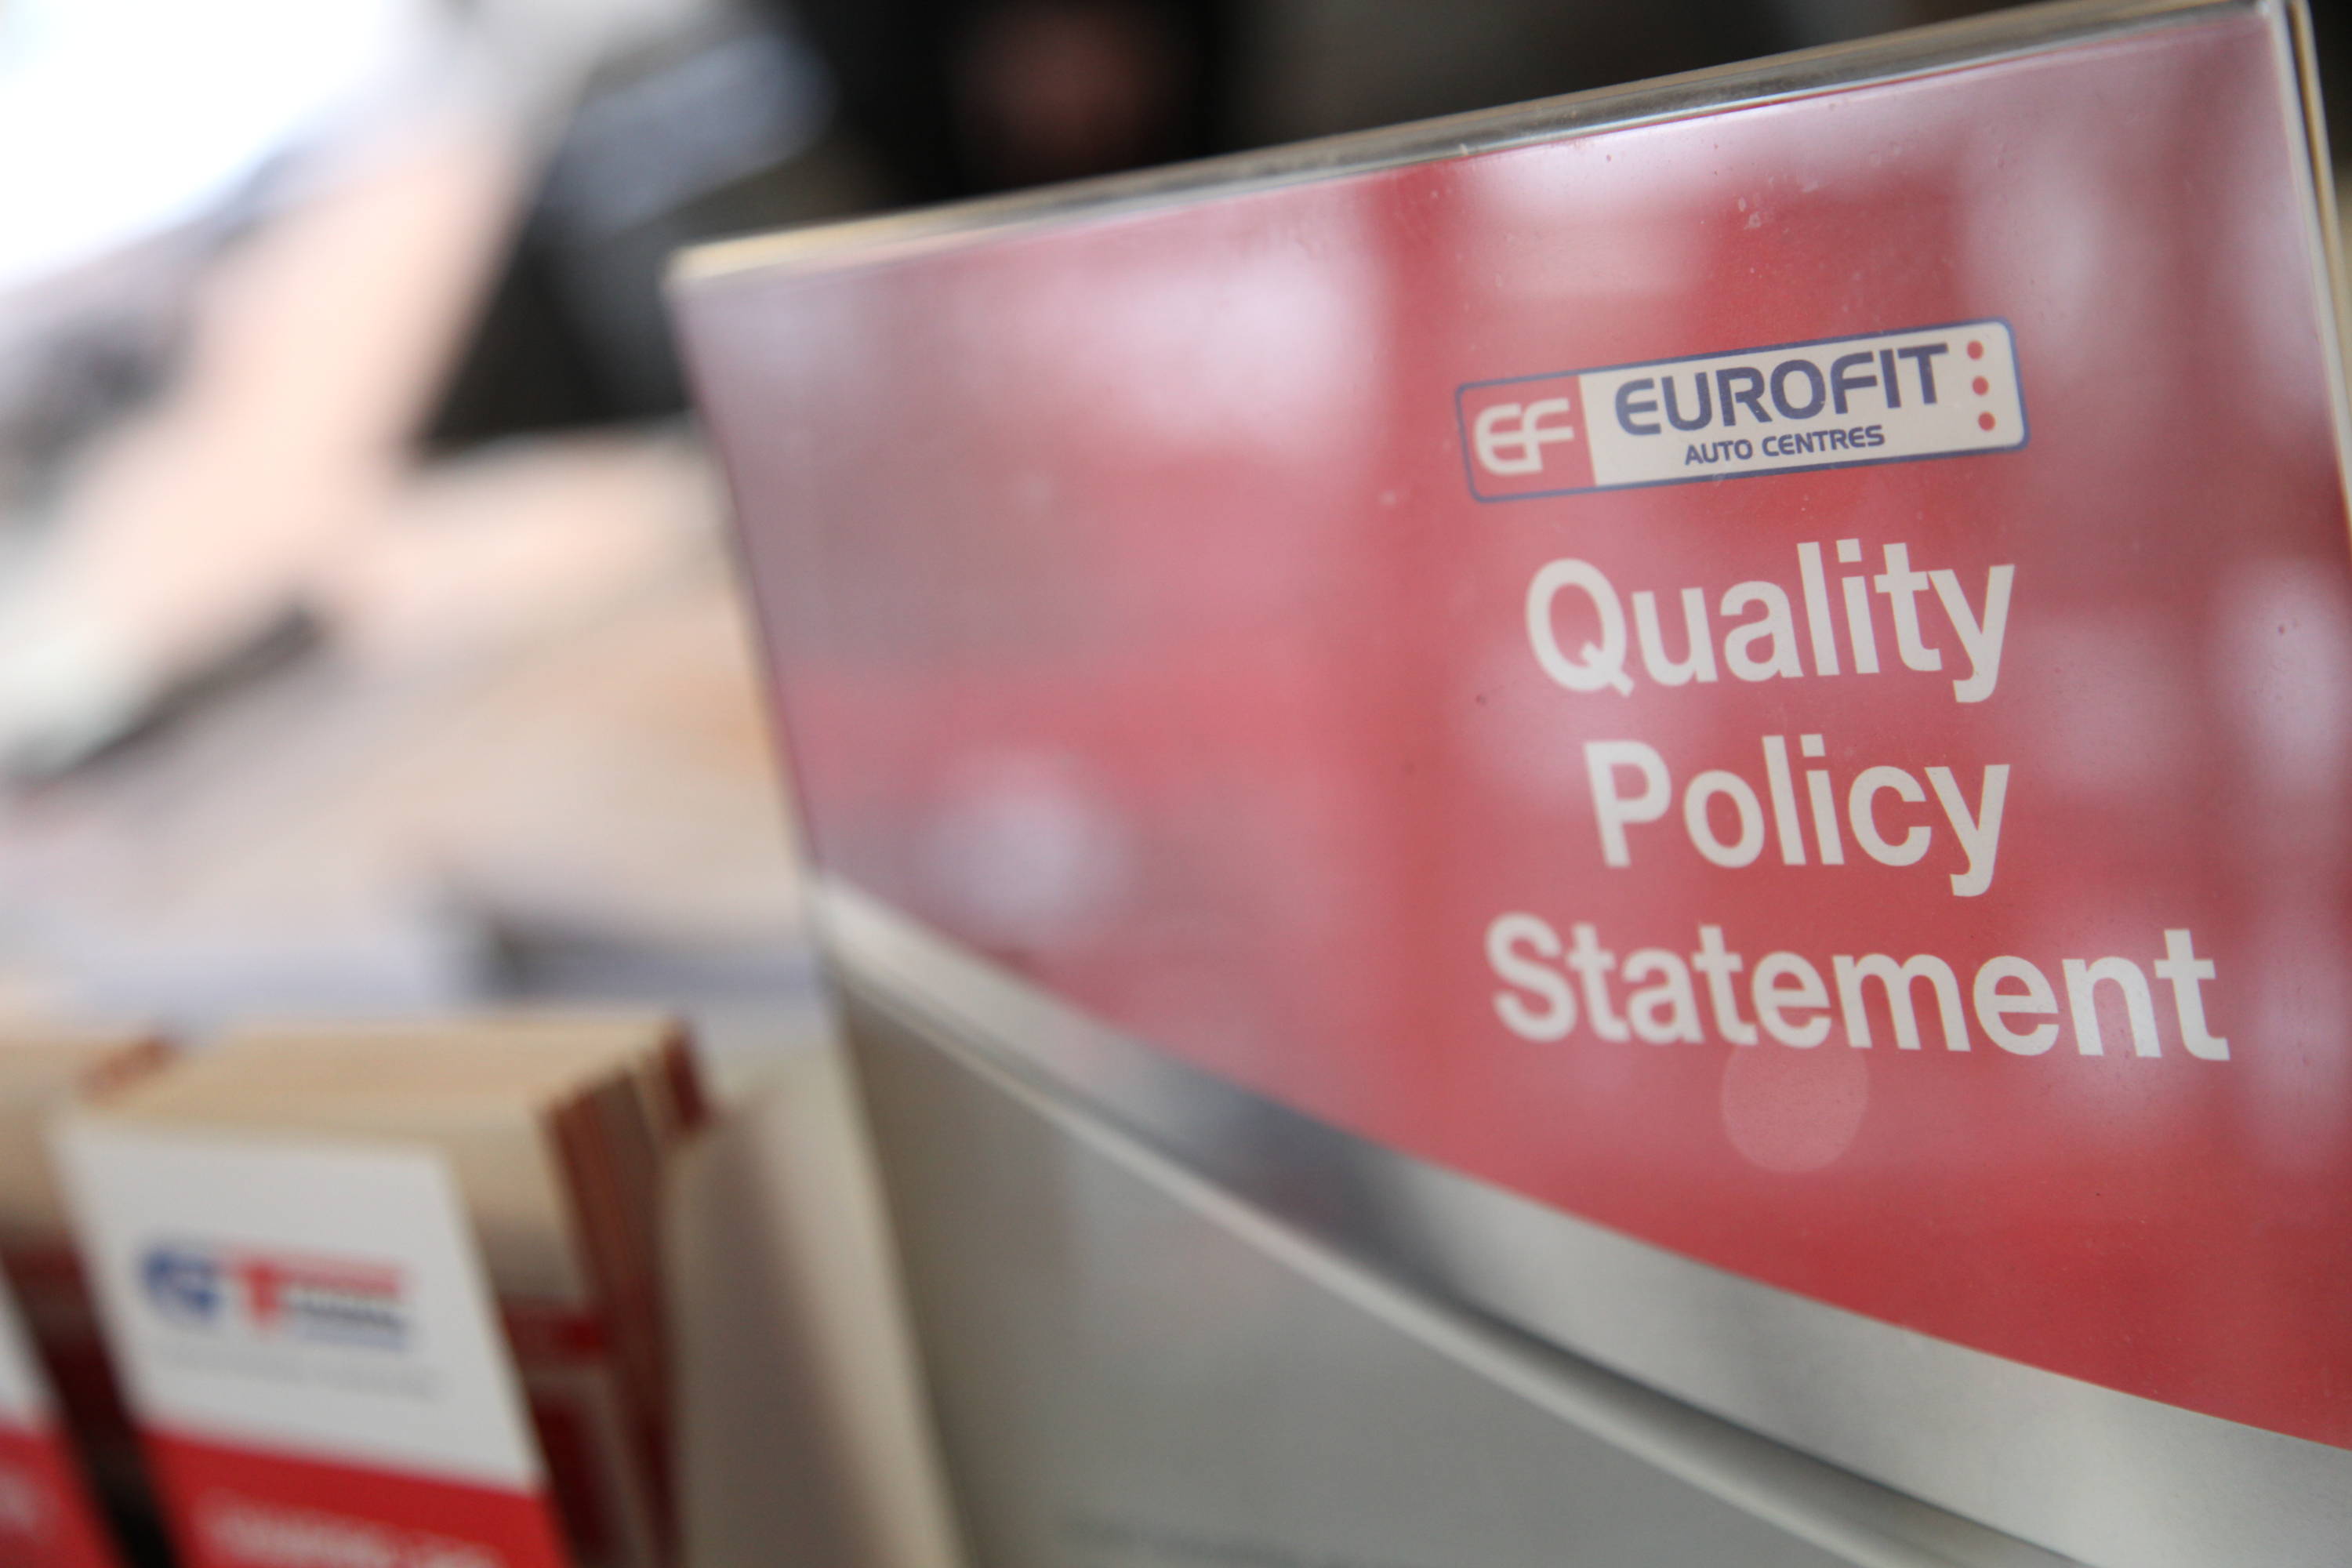 Close up of Quality Policy Statement with Eurofit logo 